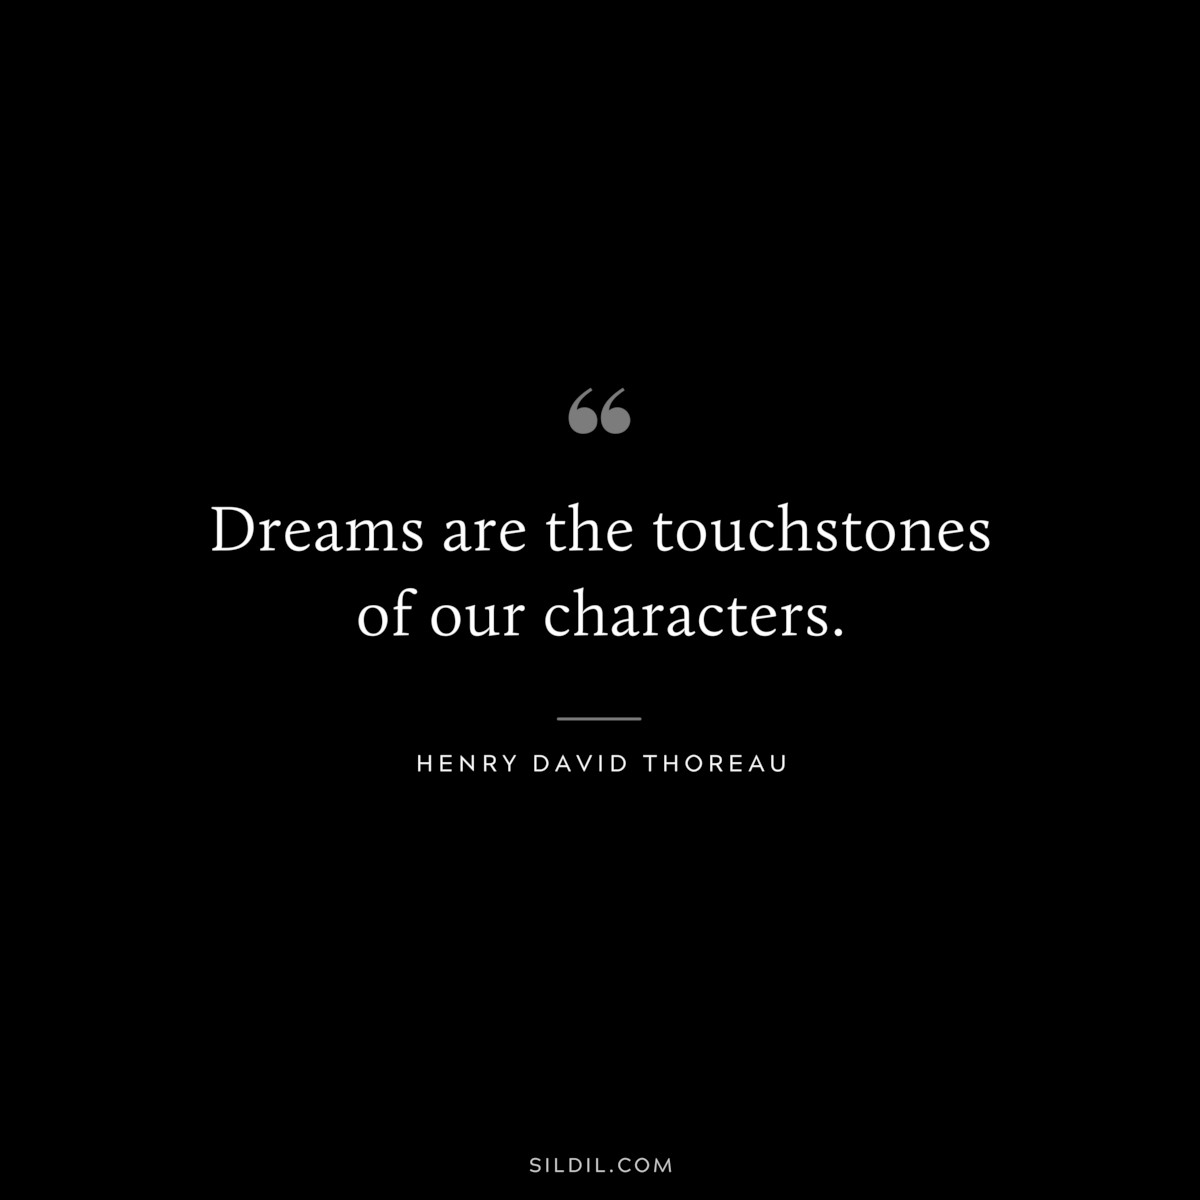 Dreams are the touchstones of our characters. — Henry David Thoreau